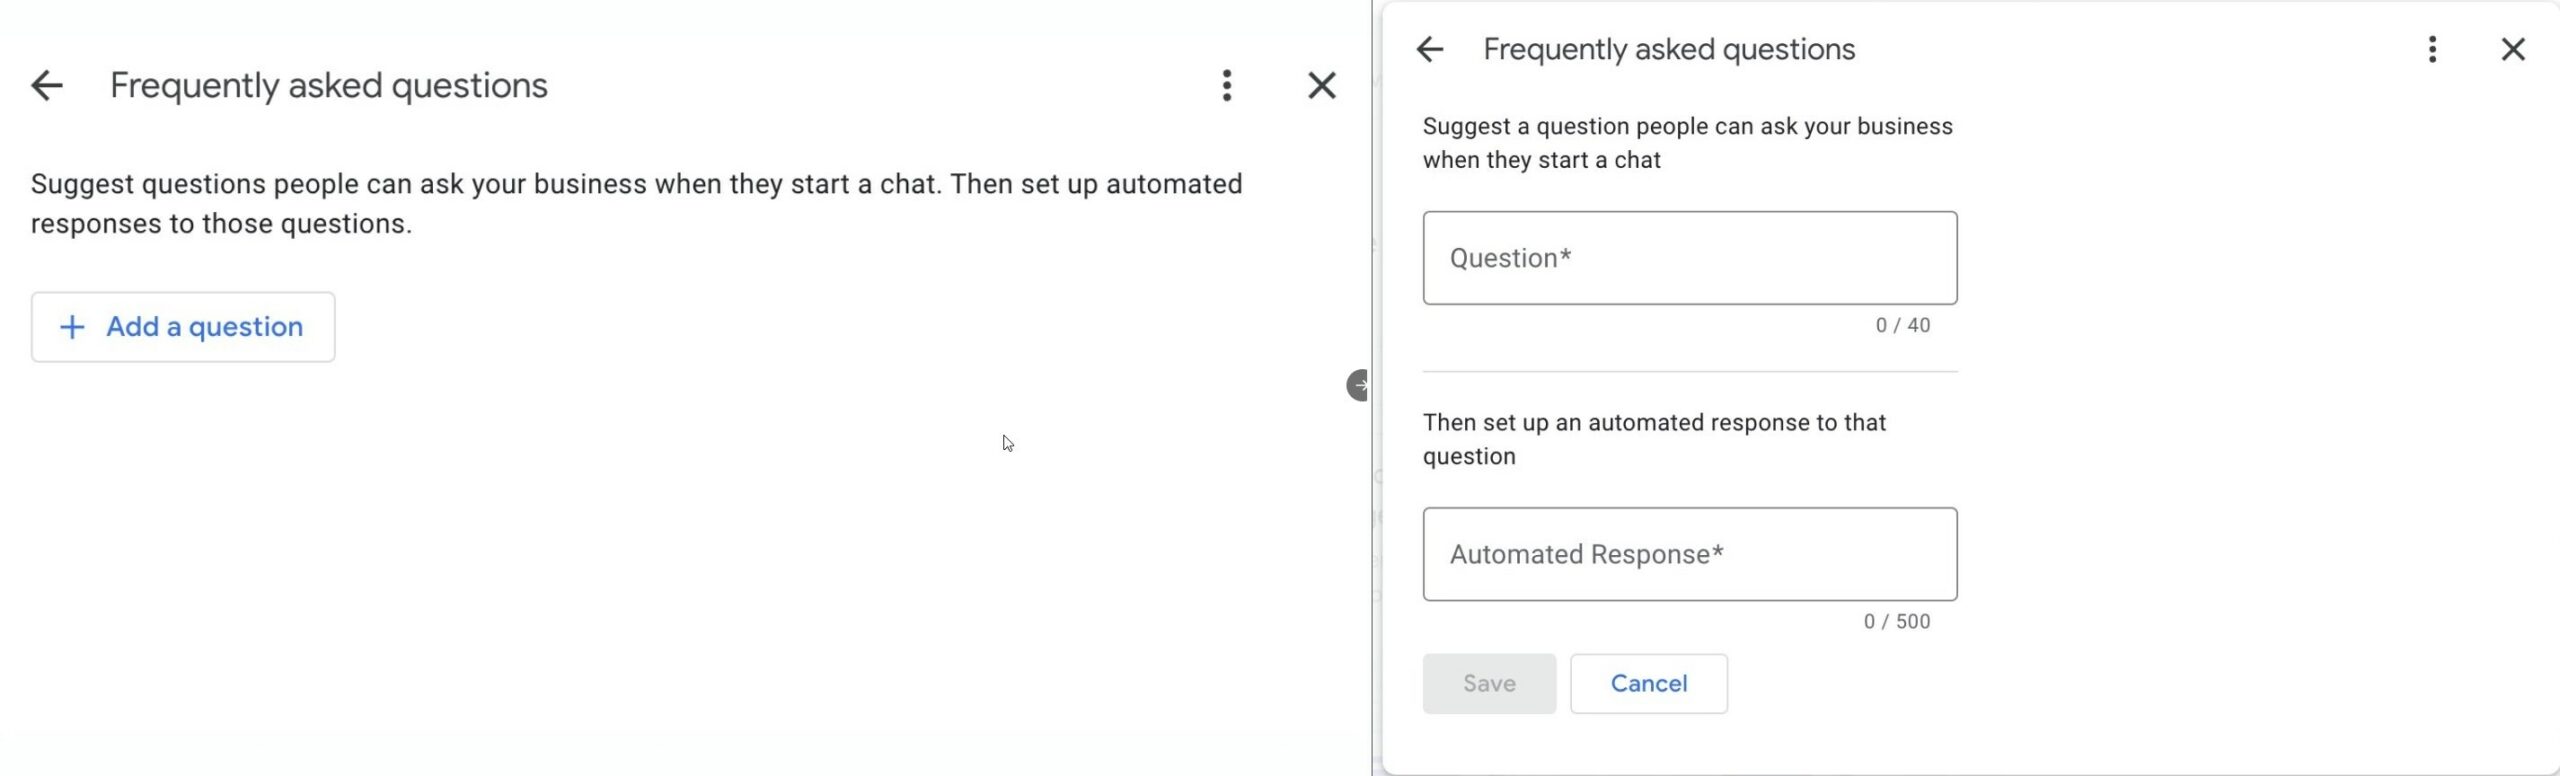 Google Adds Automated Messaging Through Business Profiles Frequently Asked Questions